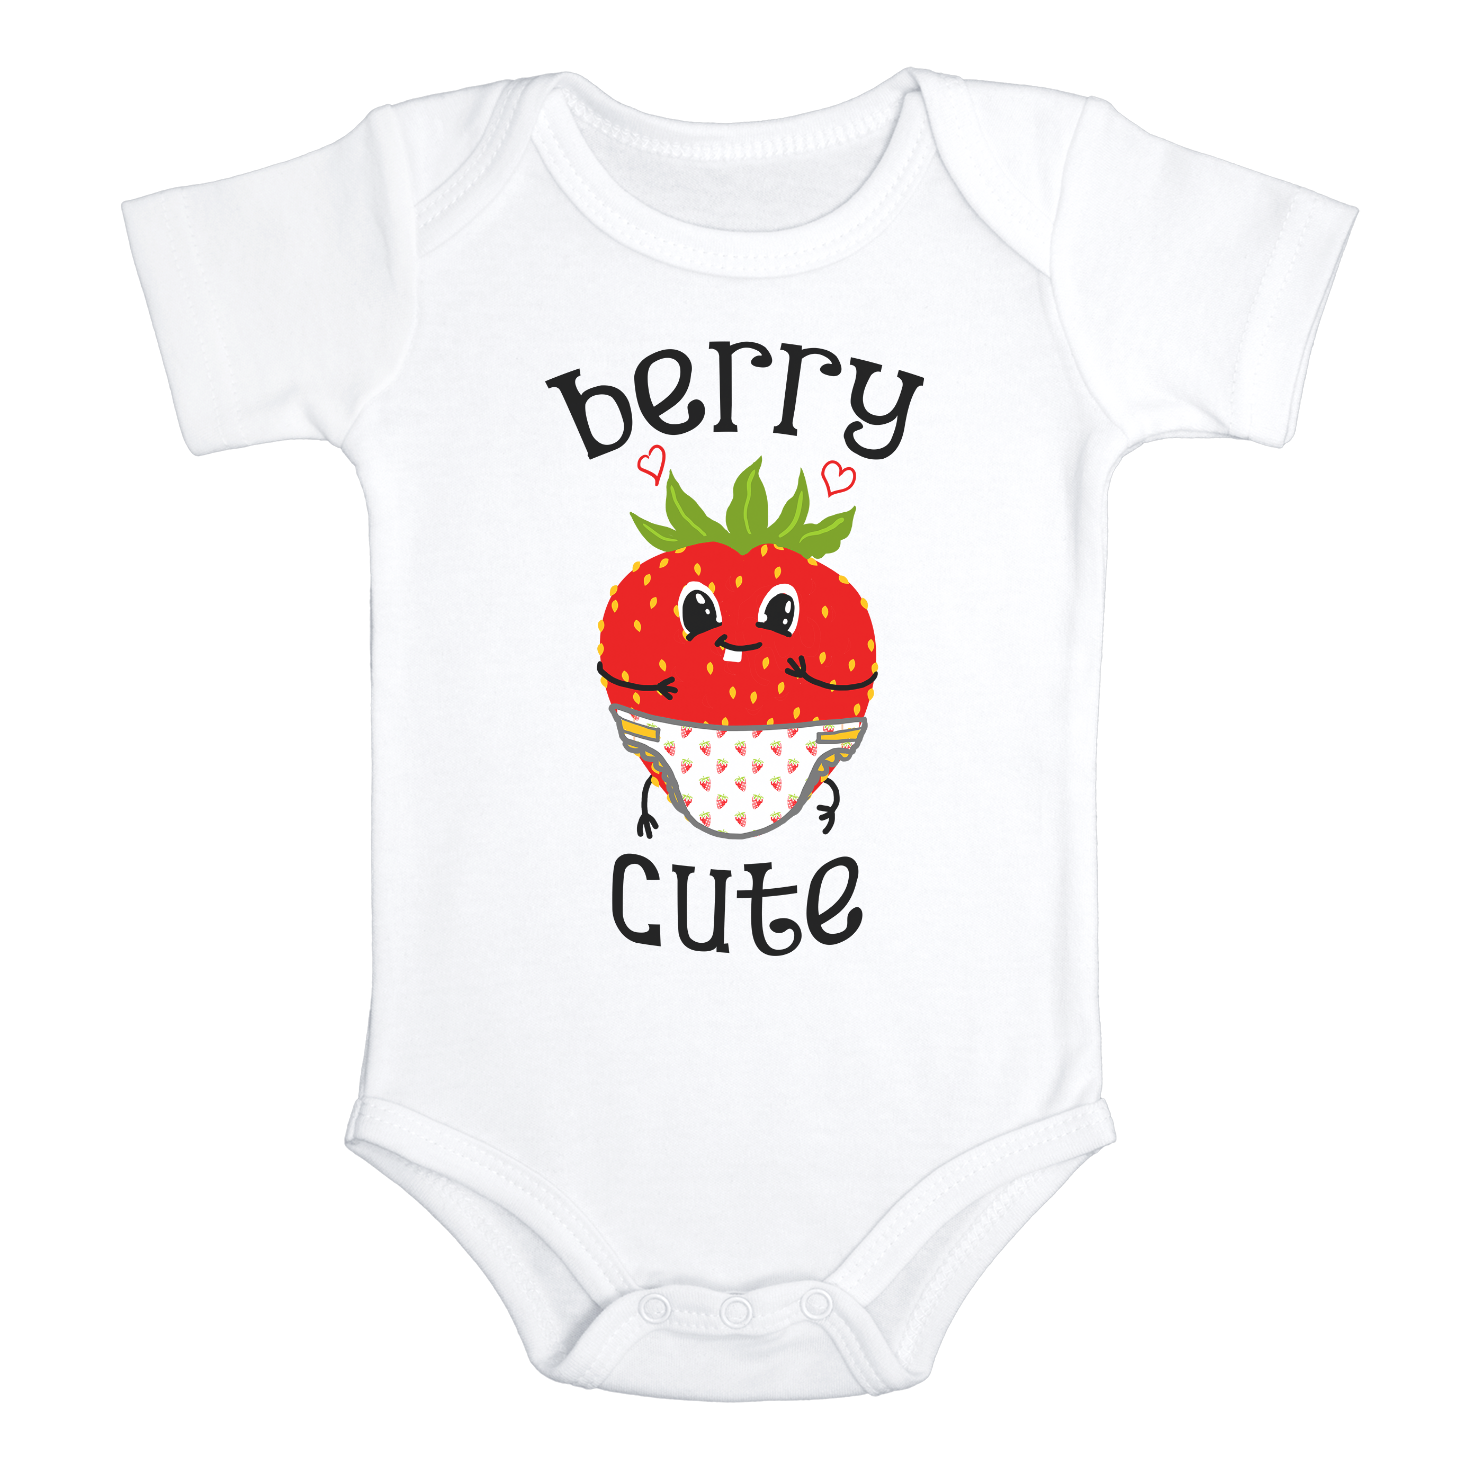 BERRY CUTE Funny baby onesies Strawberry bodysuit (white: short or long sleeve)